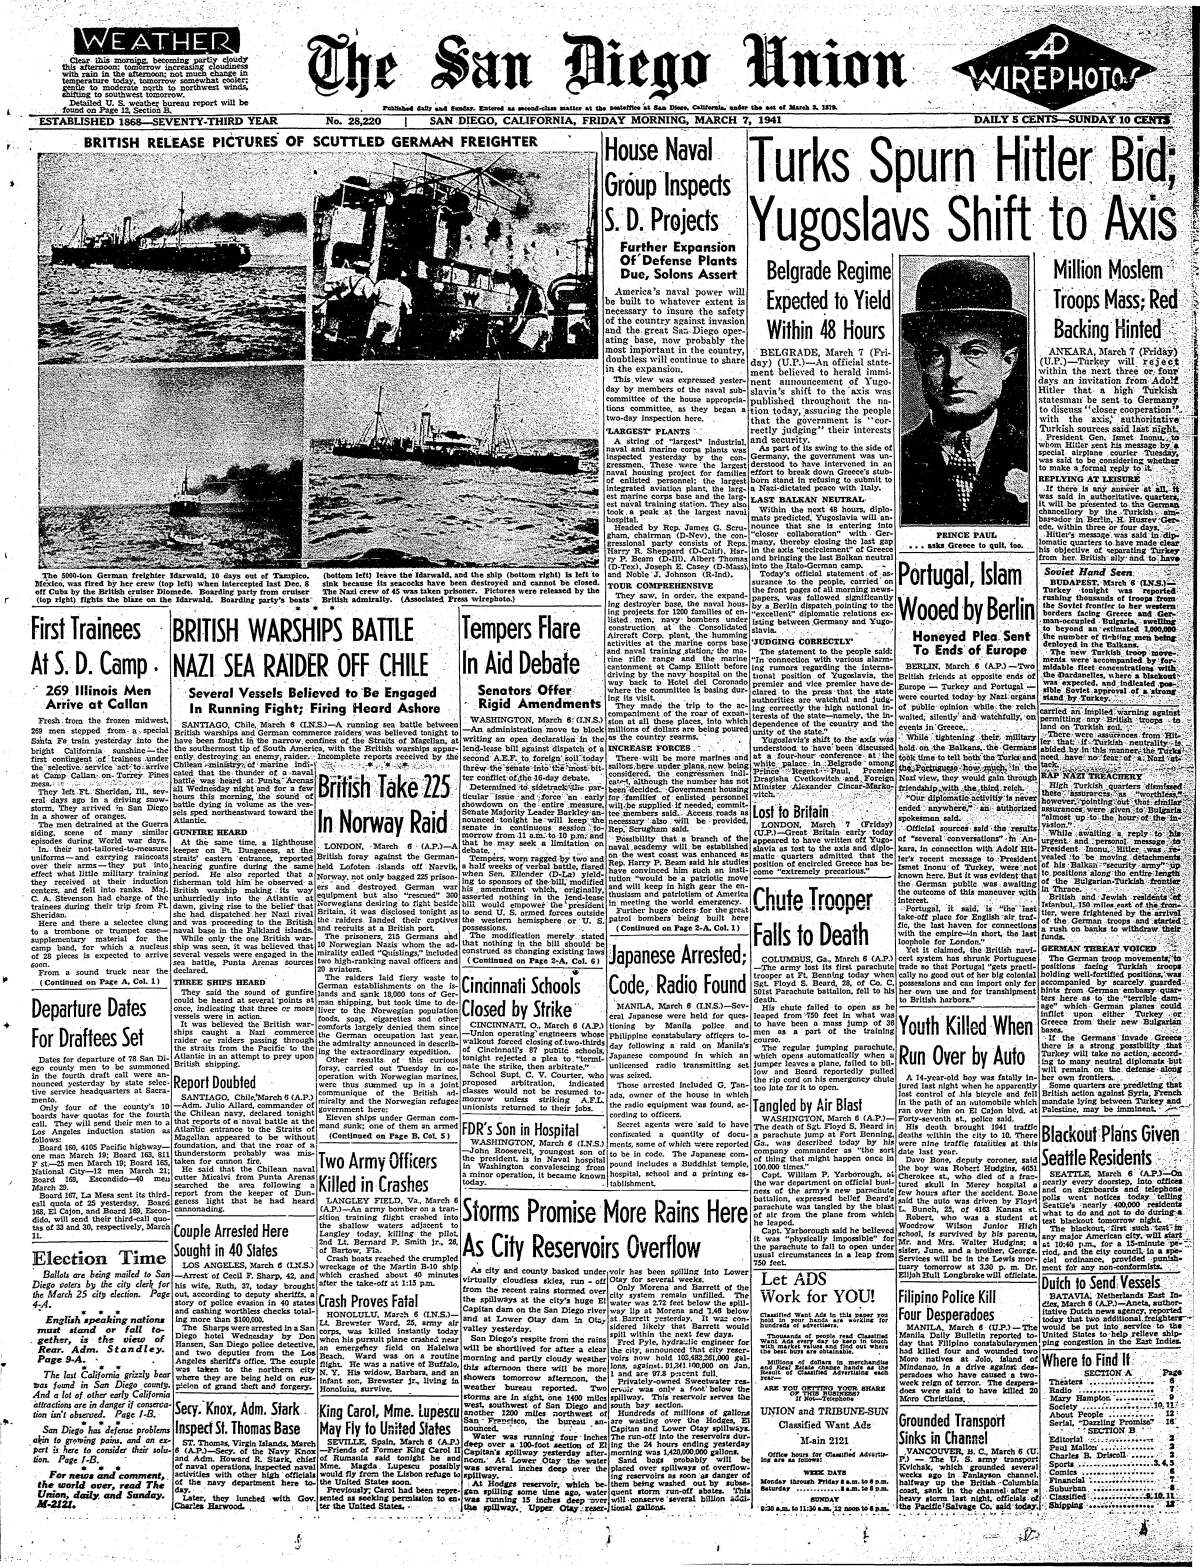 Pages from the San Diego Union newspaper